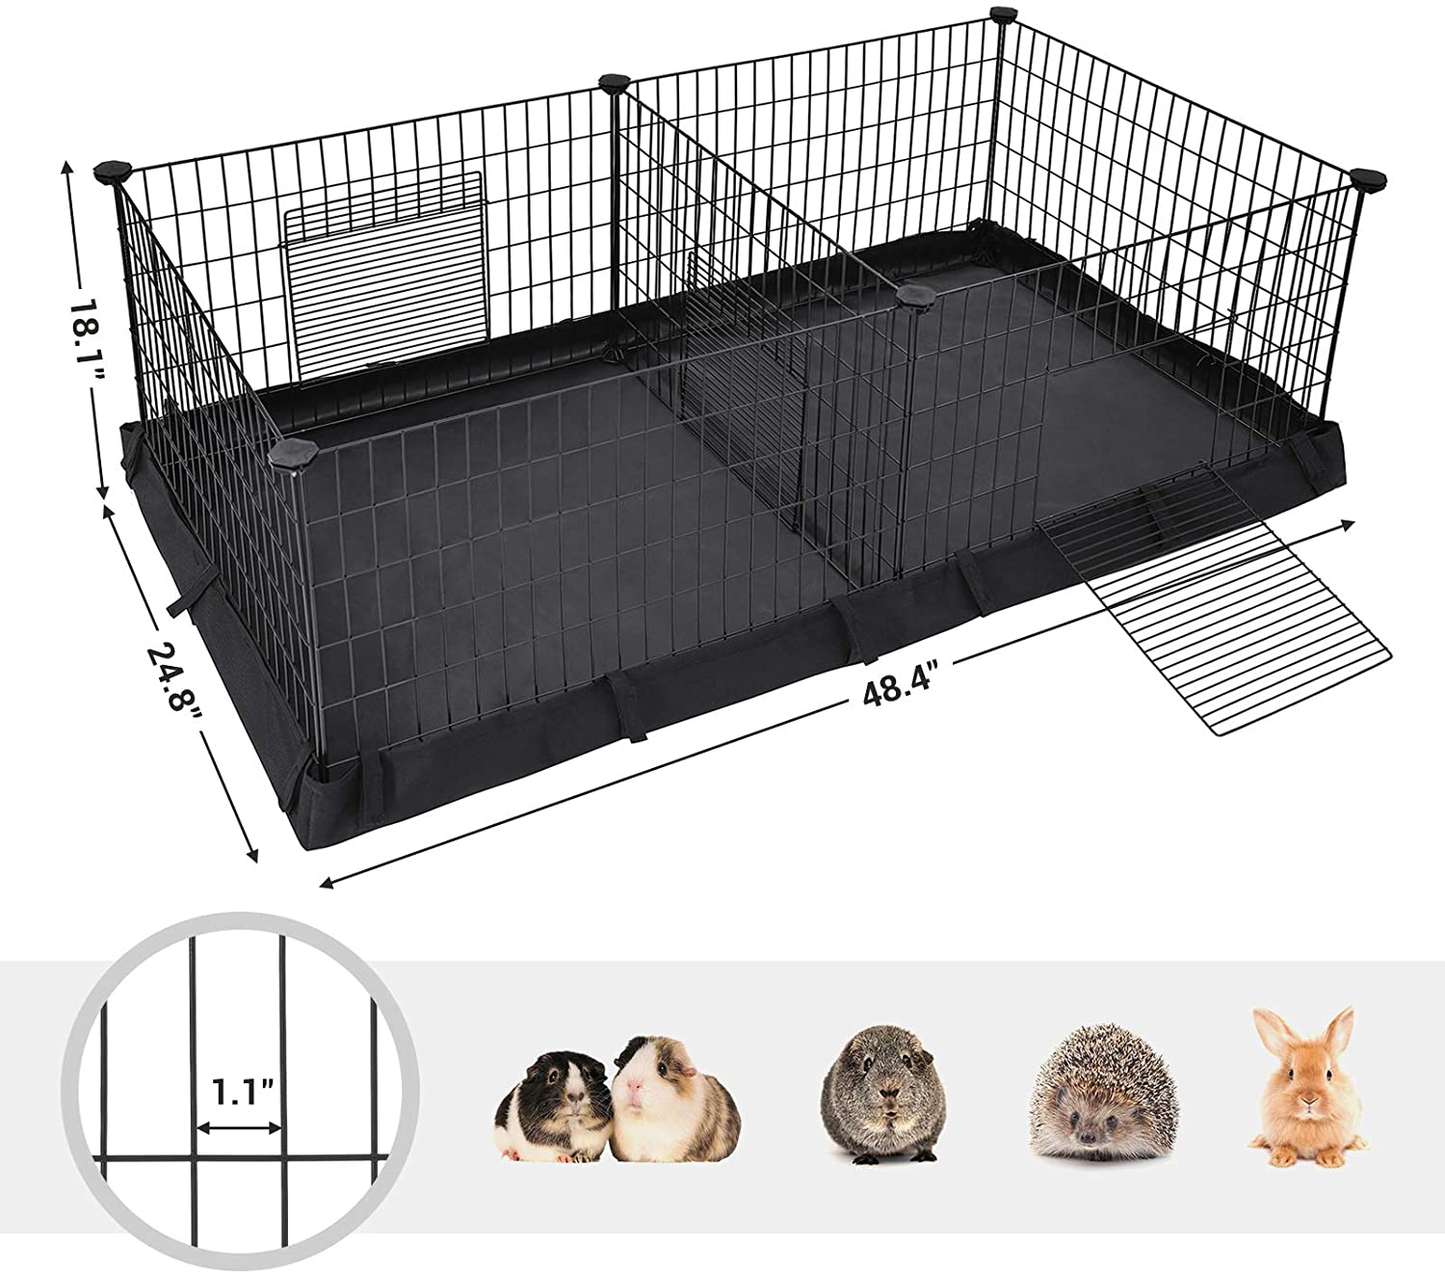 SONGMICS Guinea Pig Playpen, Small Animal Cage, Exercise Pen and Enclosure with Divider Panel for 2 Separate Spaces, Floor Mat and 3 Doors, 48.4 X 24.8 X 18.1 Inches, Black ULPI07H